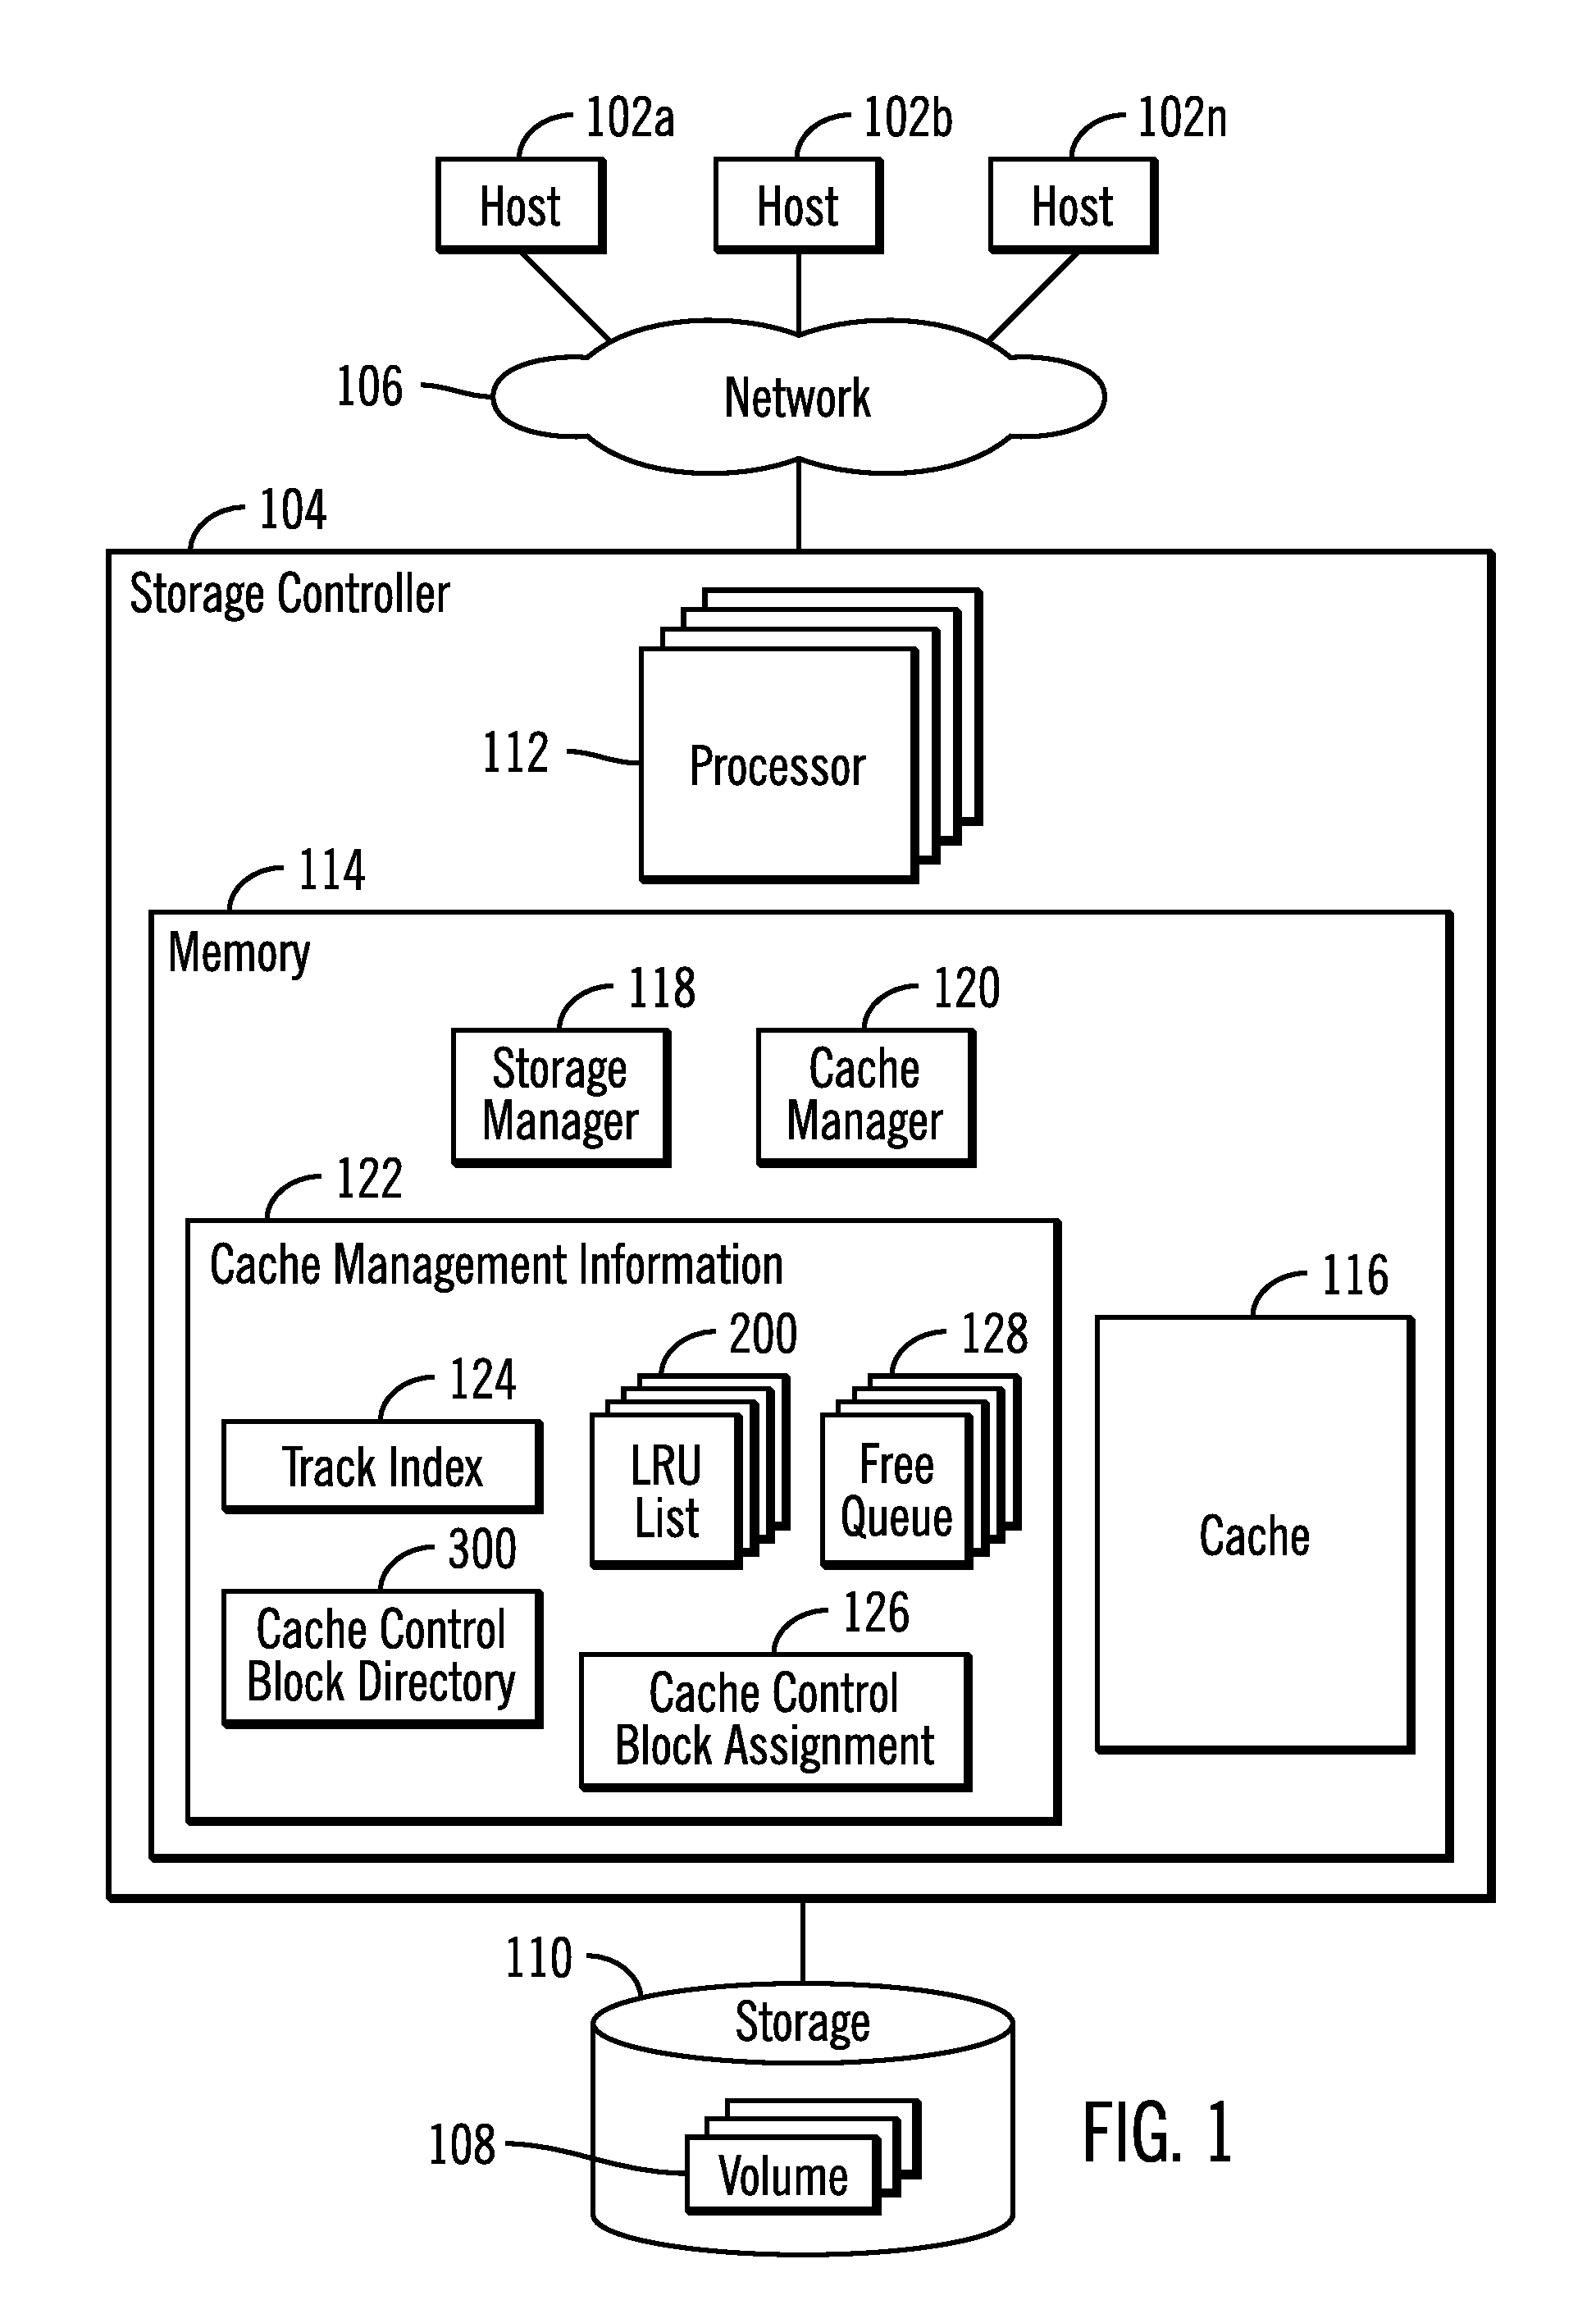 Assigning cache control blocks and cache lists to multiple processors to cache and demote tracks in a storage system